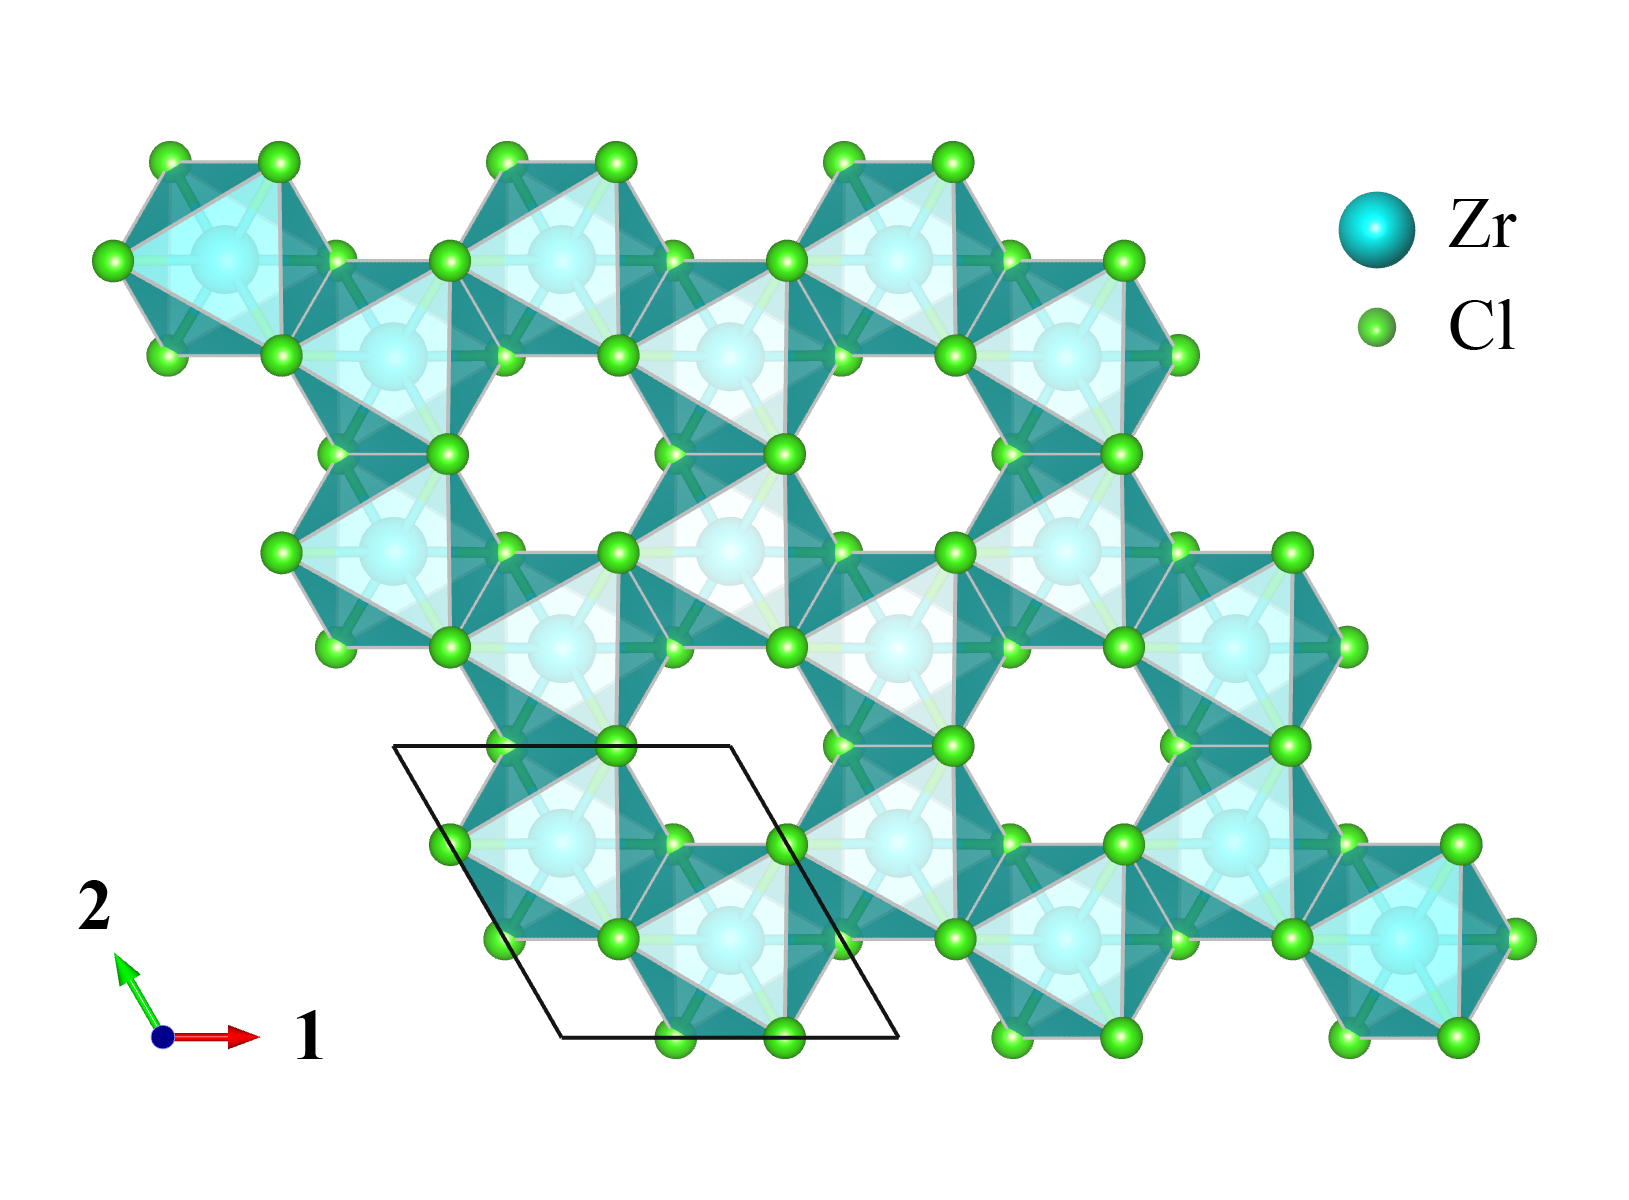 A lattice of blue and green hexagon shapes